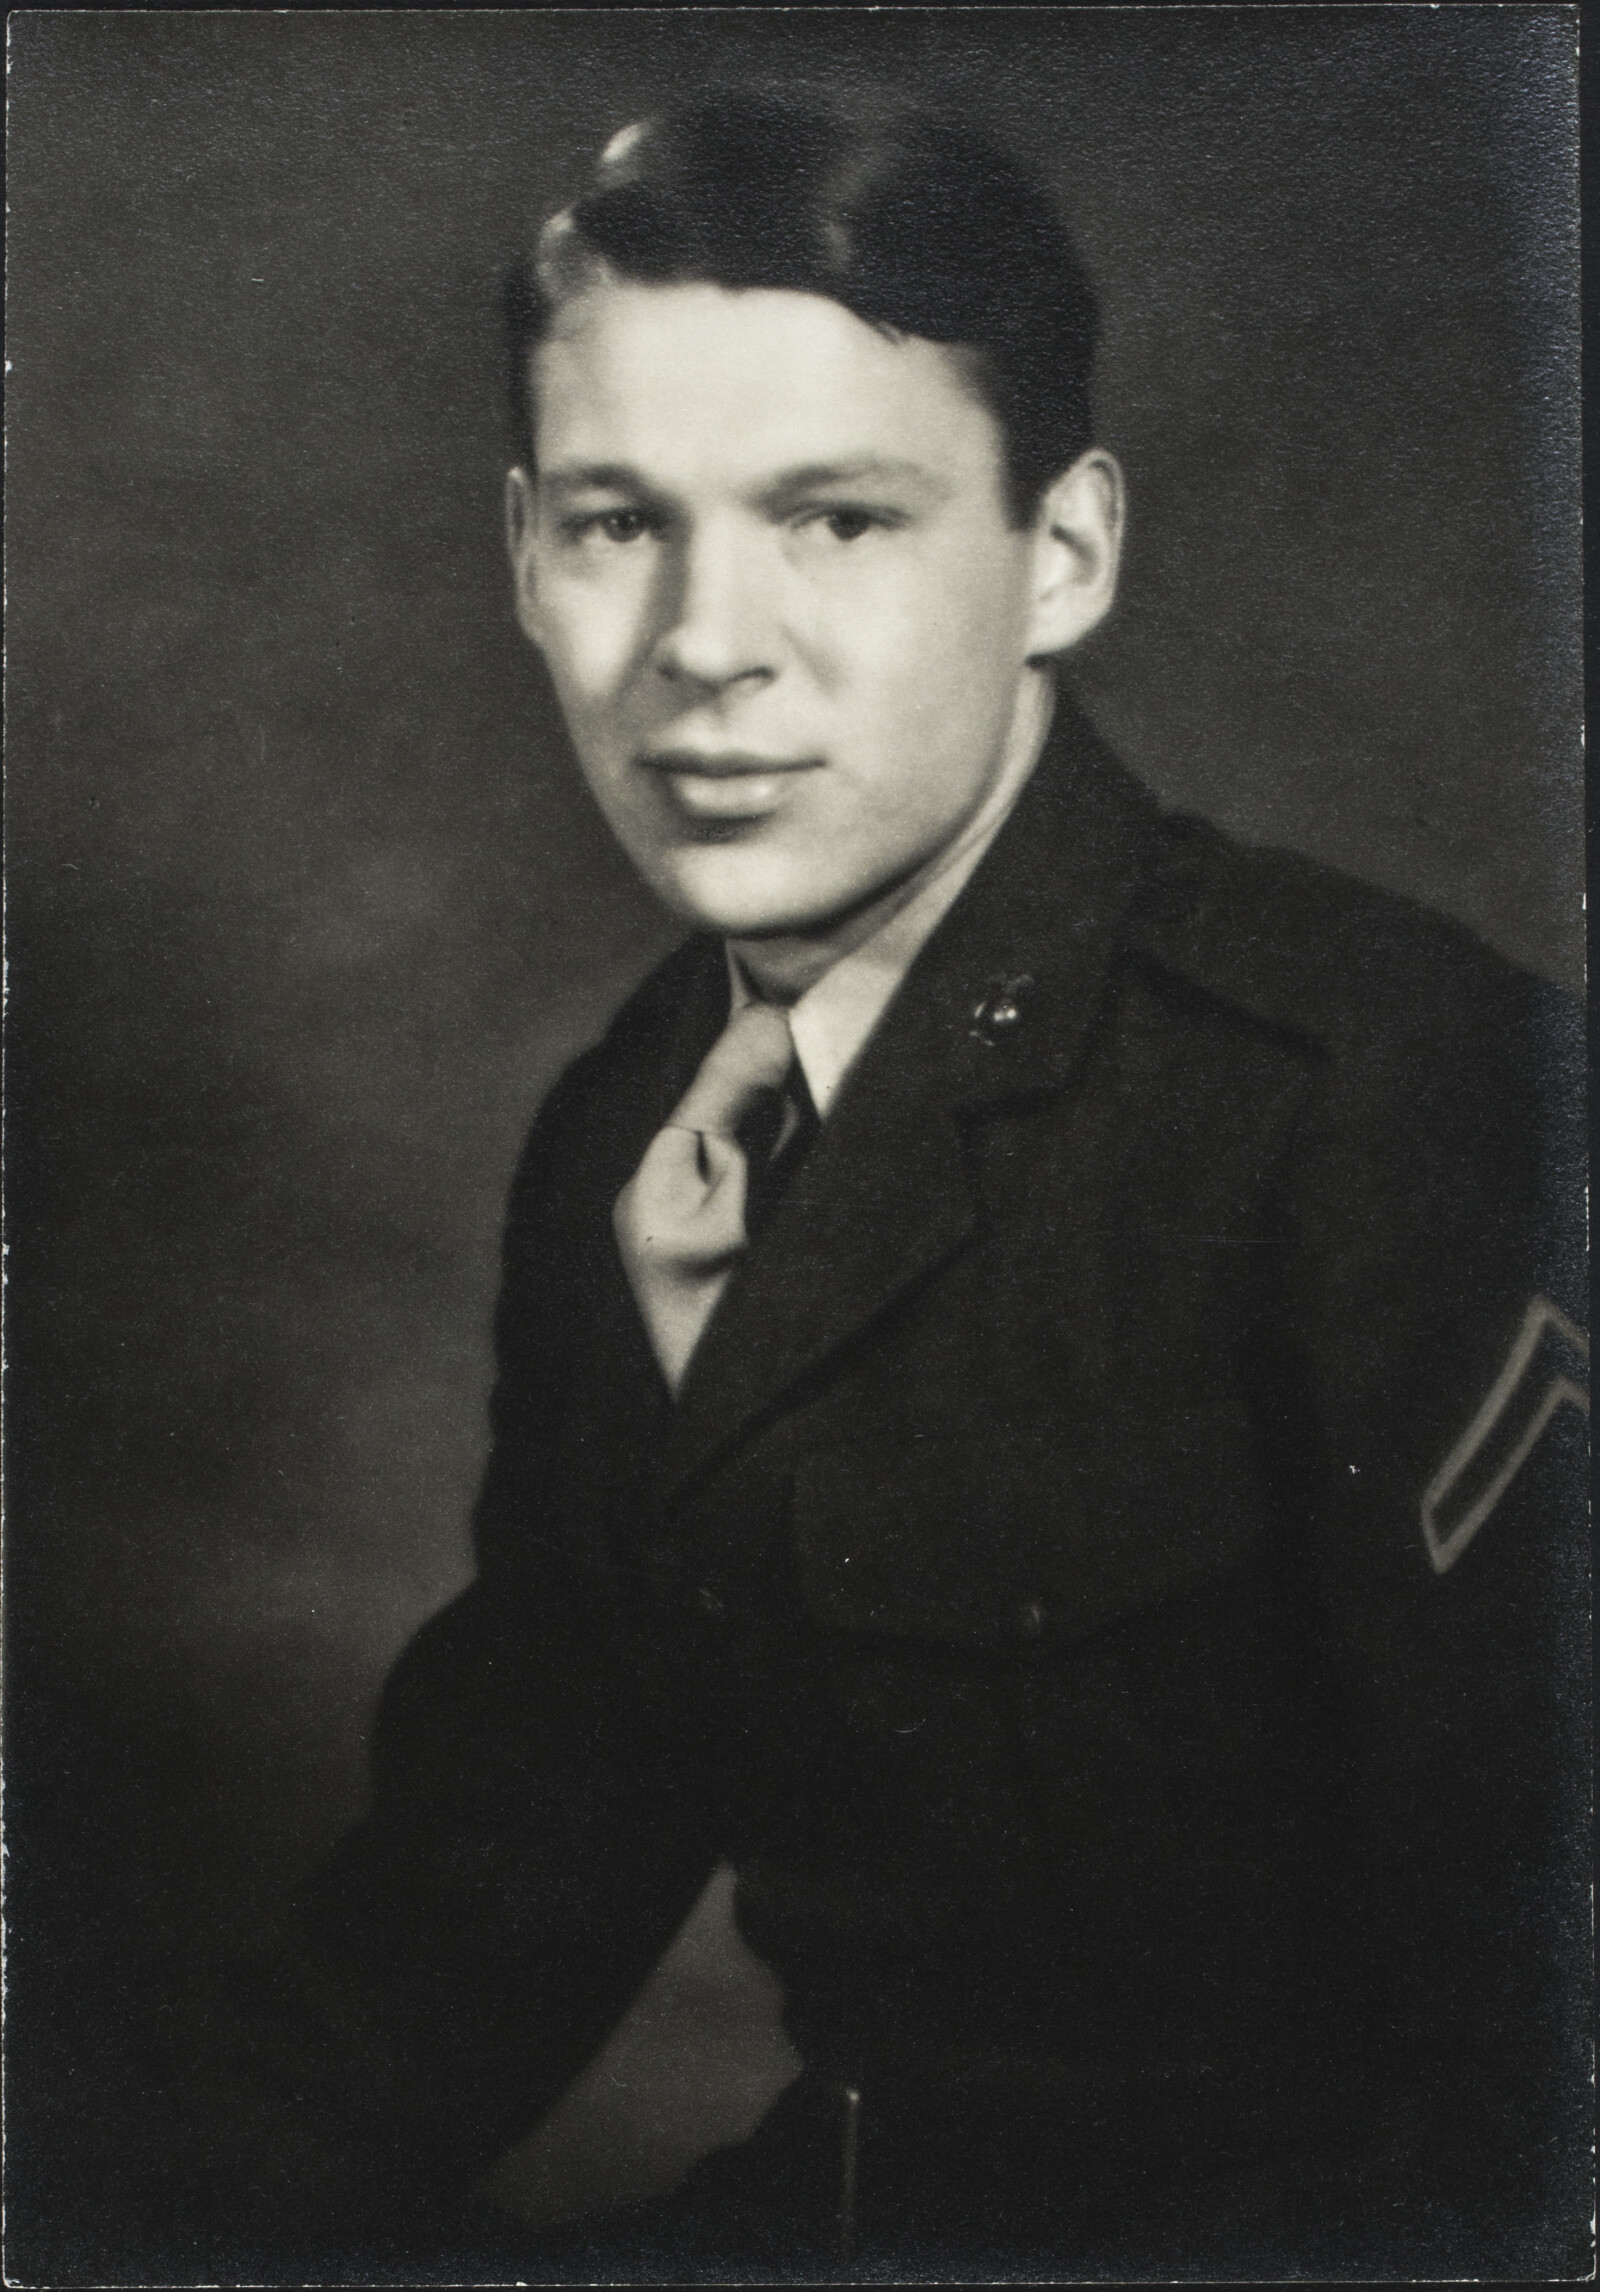 Student and Wartime Photographs